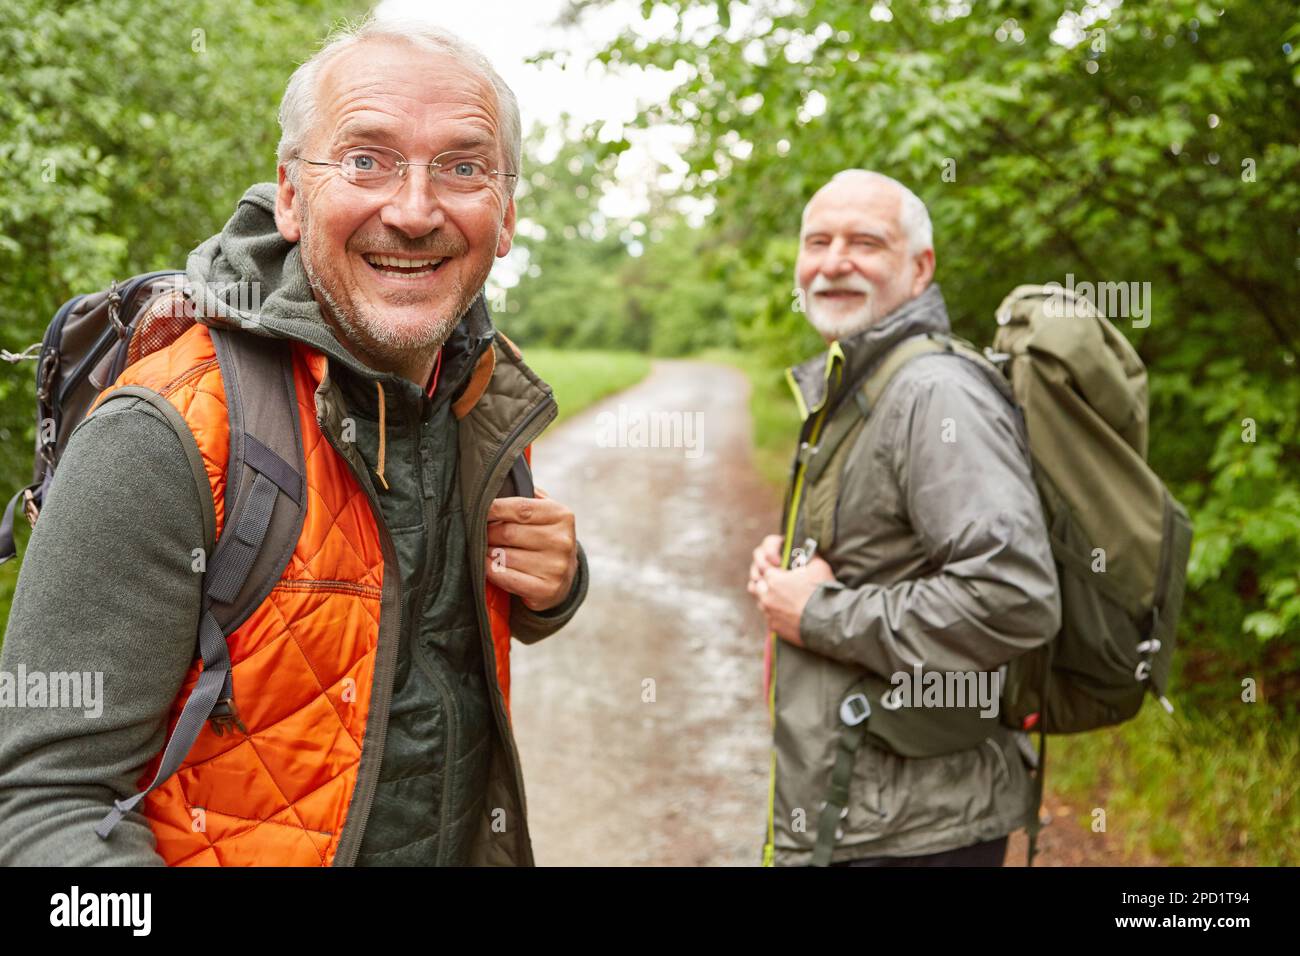 Portrait of happy elderly man with male friend in background hiking at forest during rainy reason Stock Photo